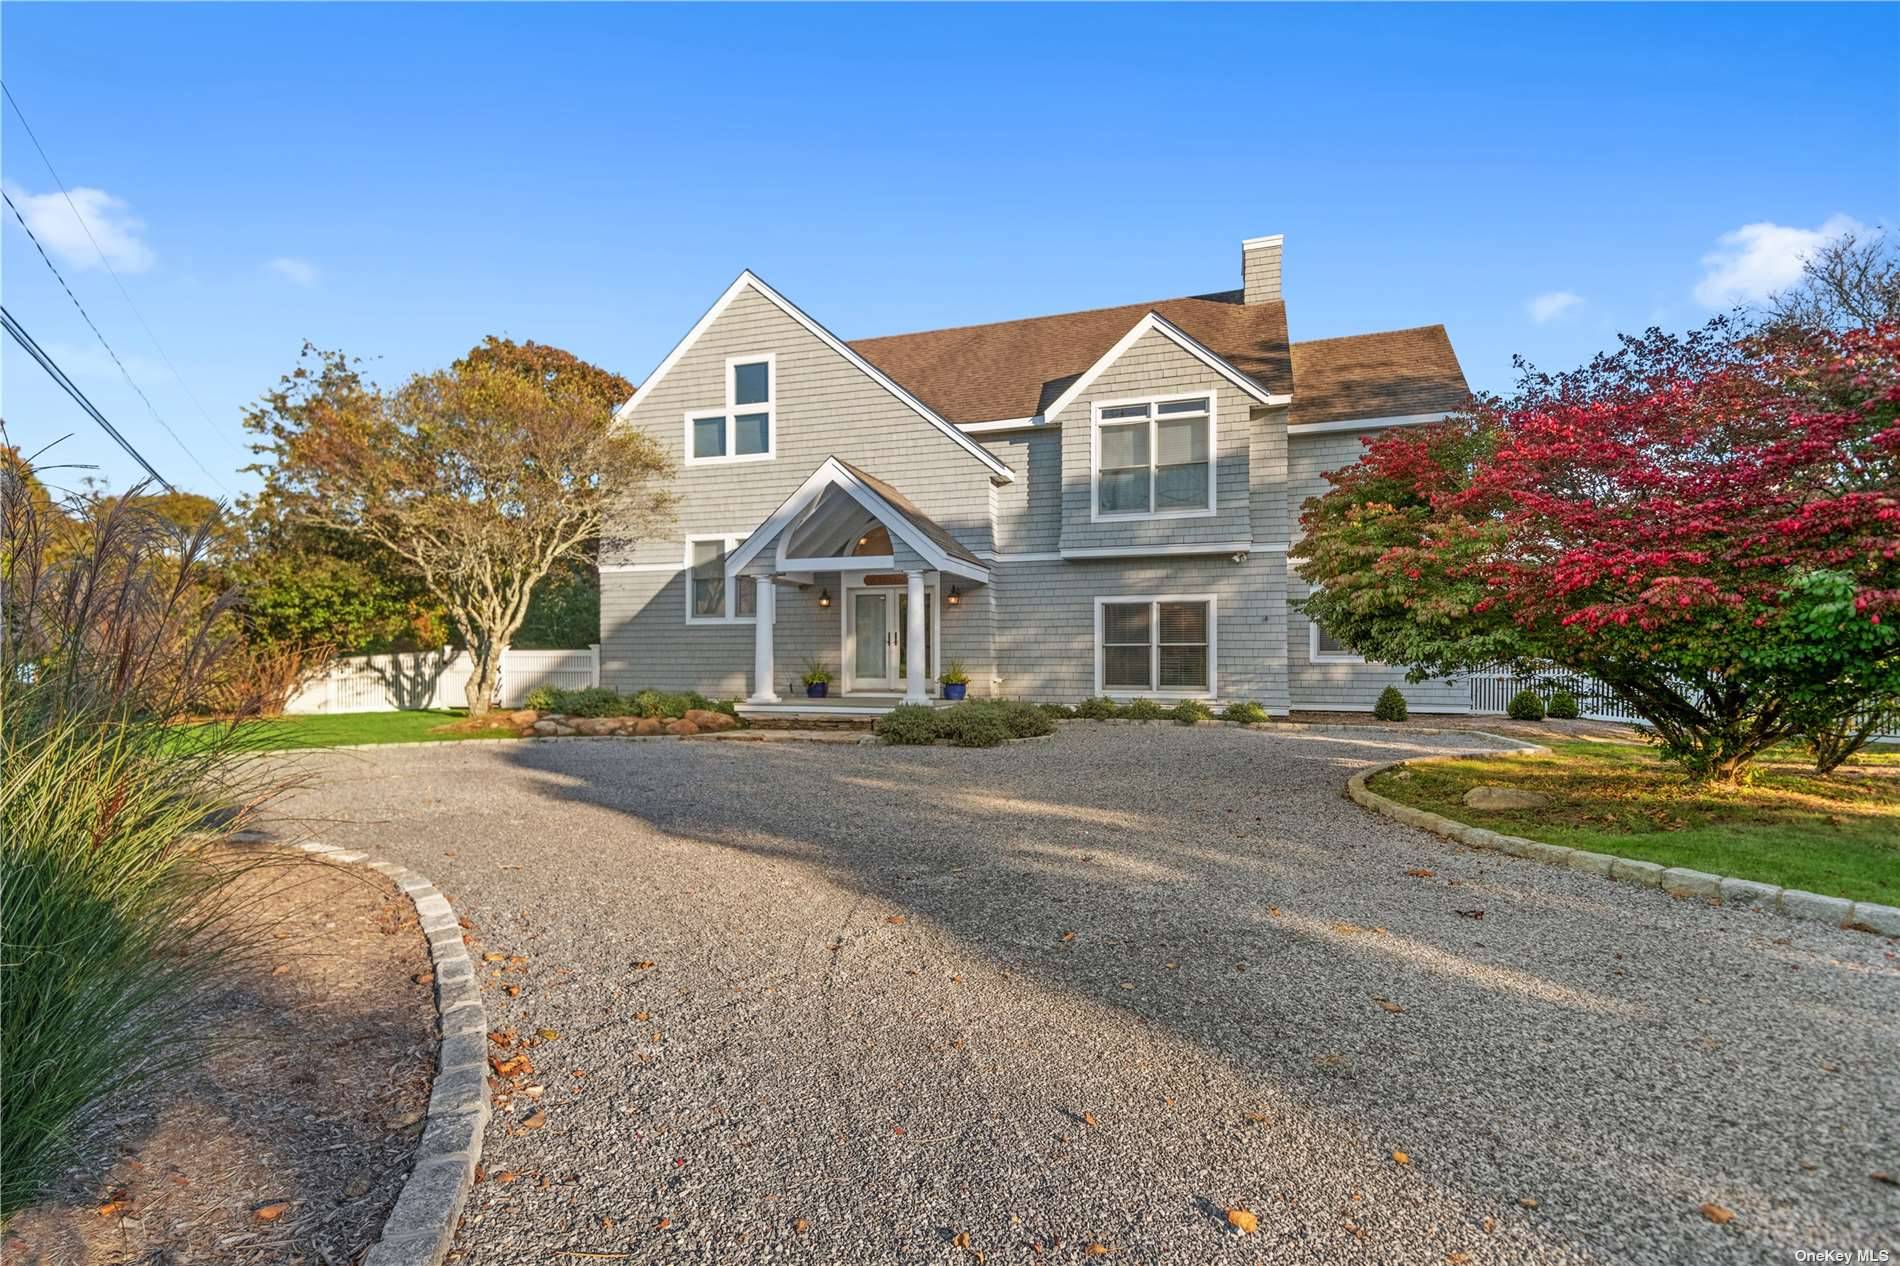 HITHER HILLS WITH POOL OCEAN BEACH RIGHTS New to market Stylish Montauk beach house offering open floor plan, sun filled living with fireplace, gourmet kitchen with wine fridge and new ...